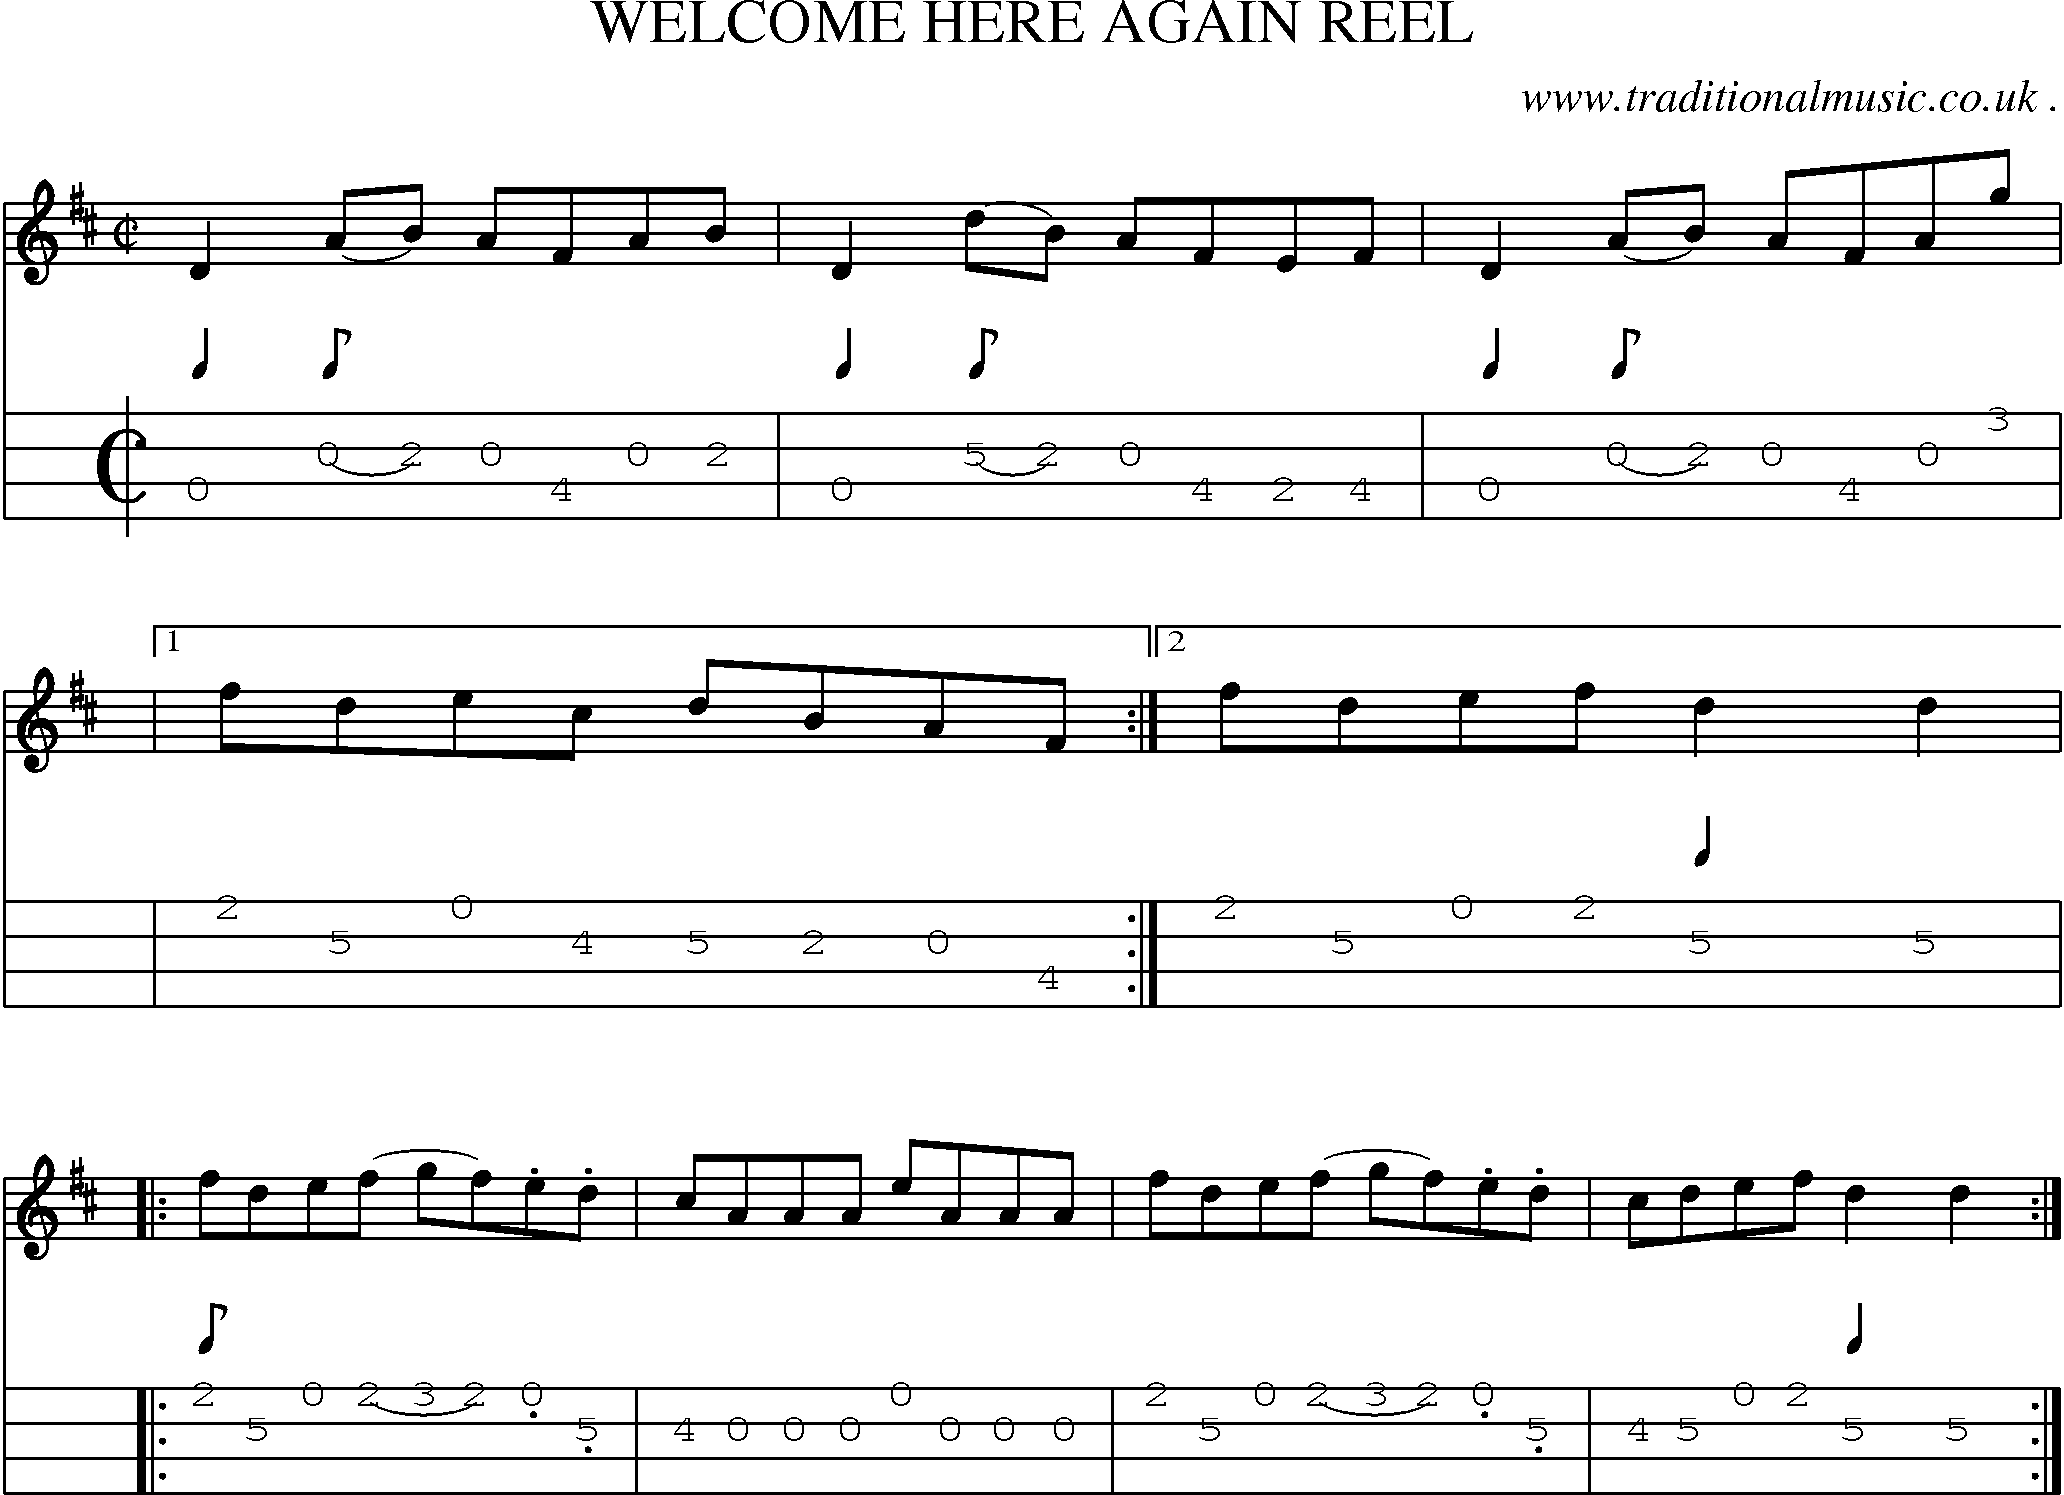 Sheet-Music and Mandolin Tabs for Welcome Here Again Reel